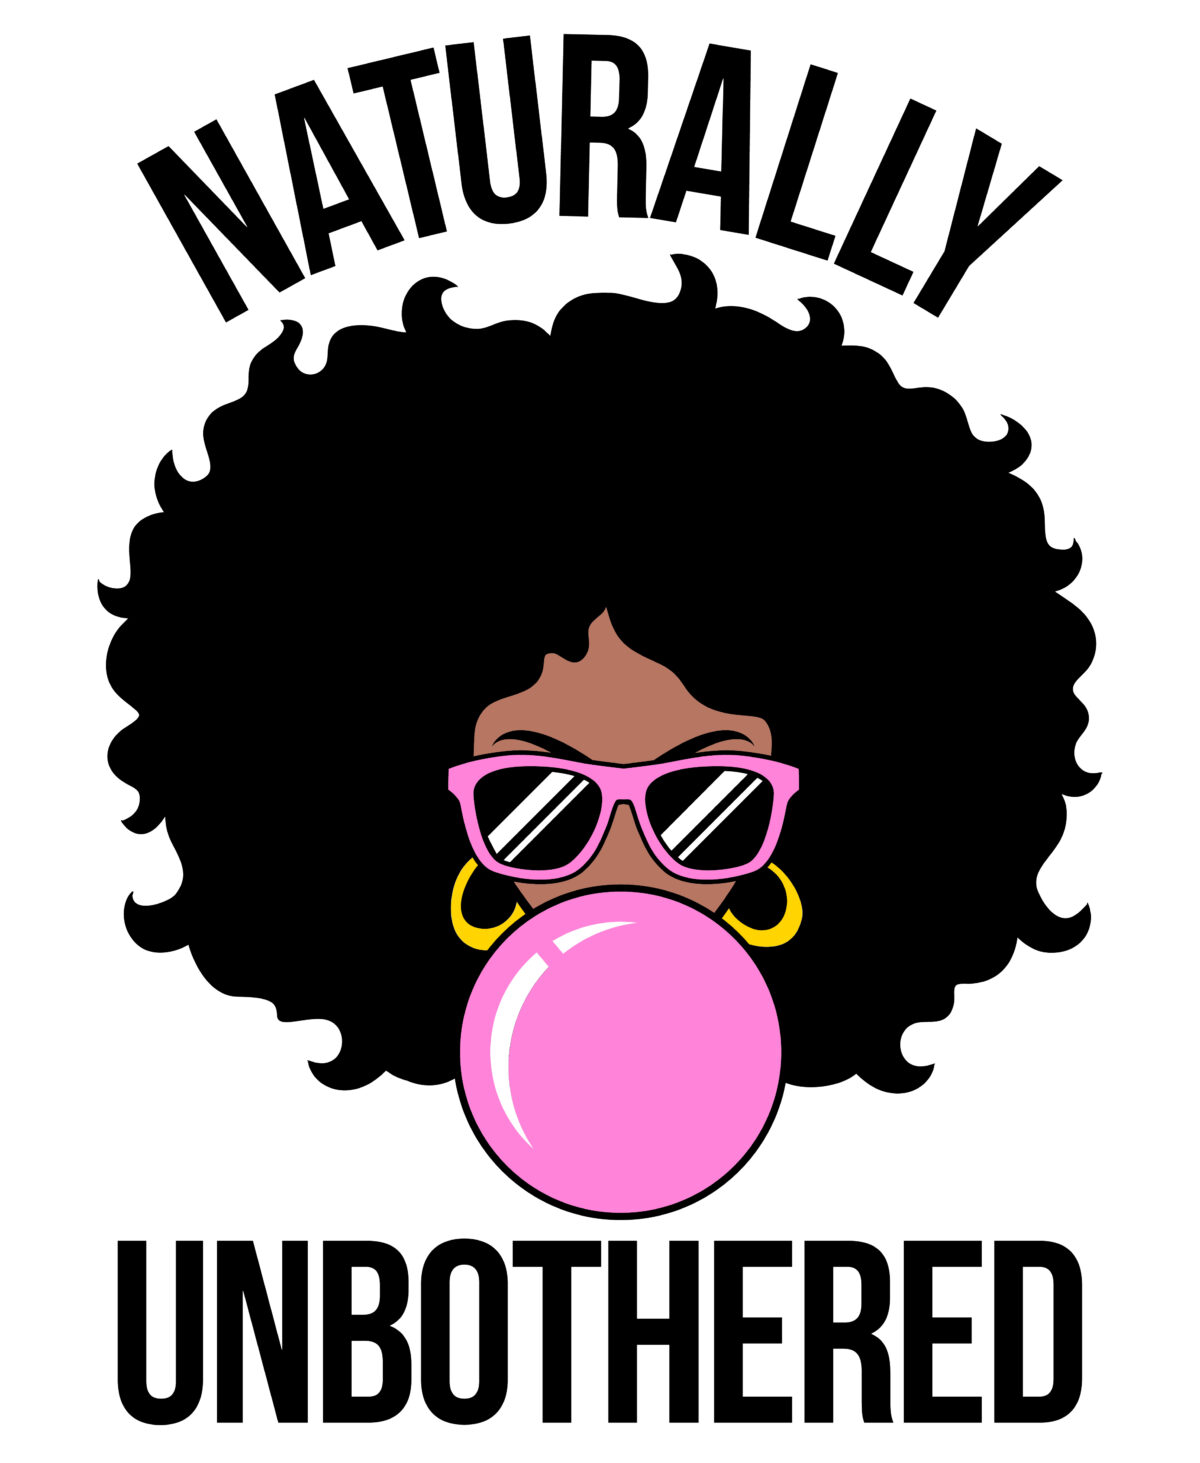 Naturally unbothered afro woman Svg